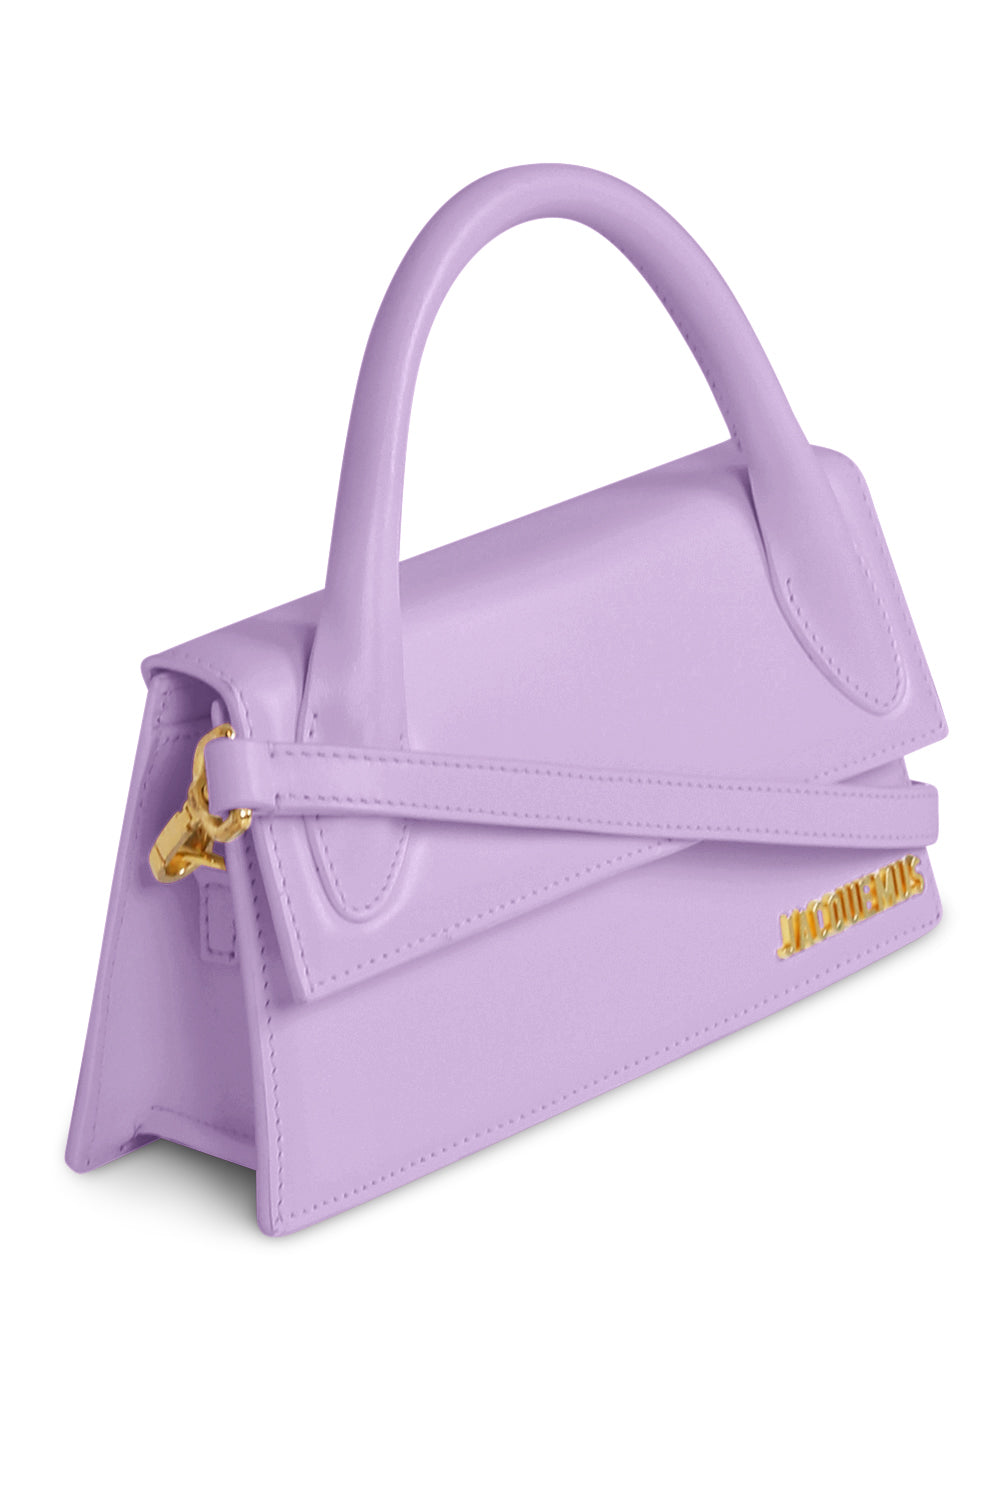 Jacquemus Le Chiquito Long Lilac in Cowskin Leather with Gold-tone - US